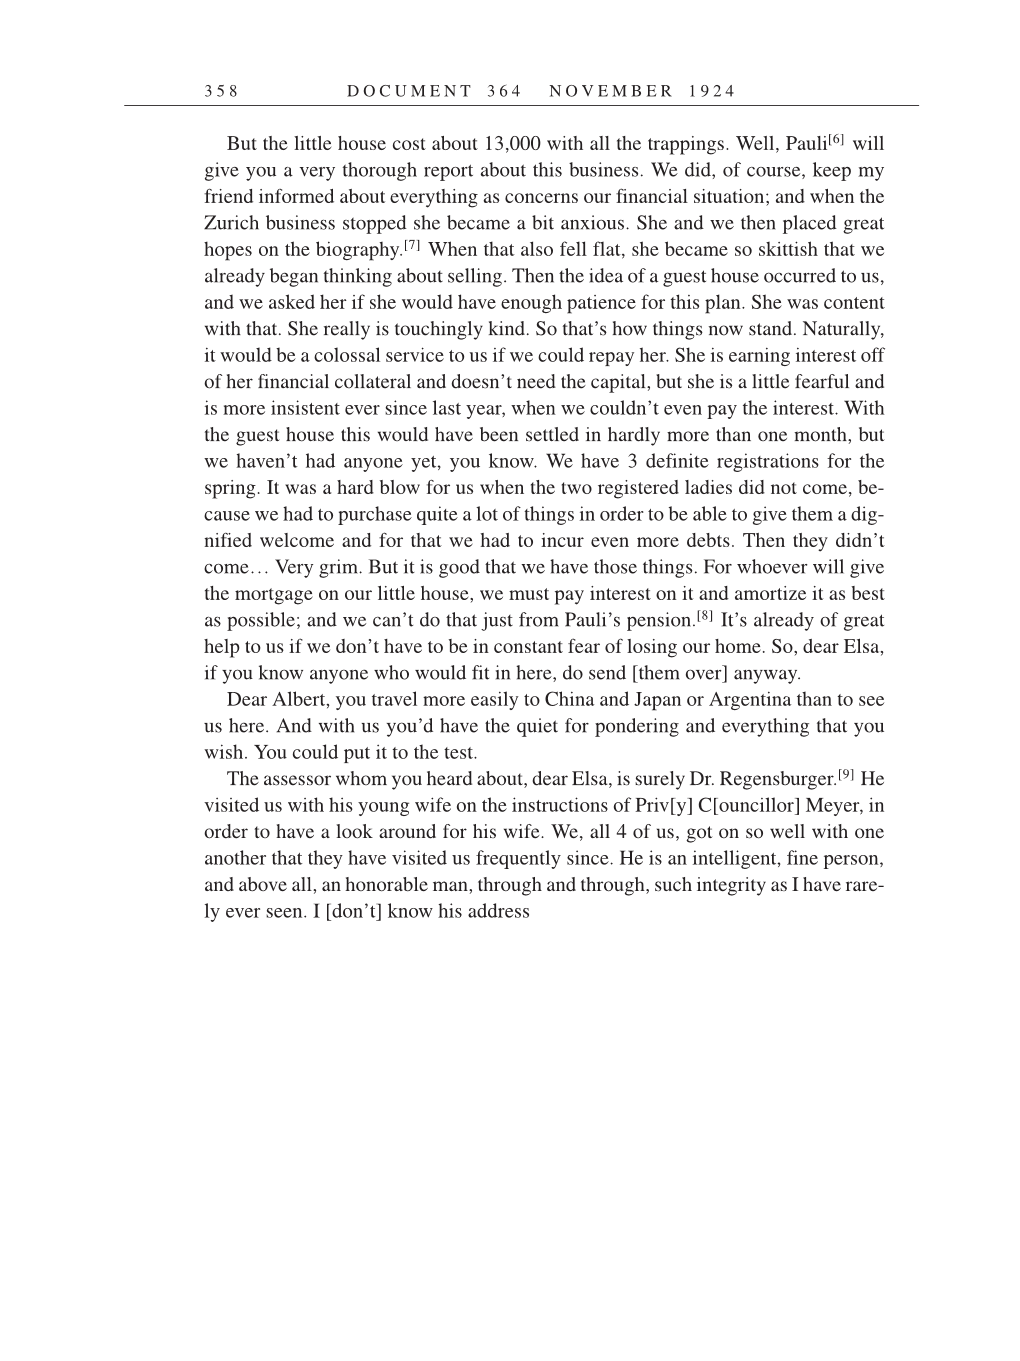 Volume 14: The Berlin Years: Writings & Correspondence, April 1923-May 1925 (English Translation Supplement) page 358